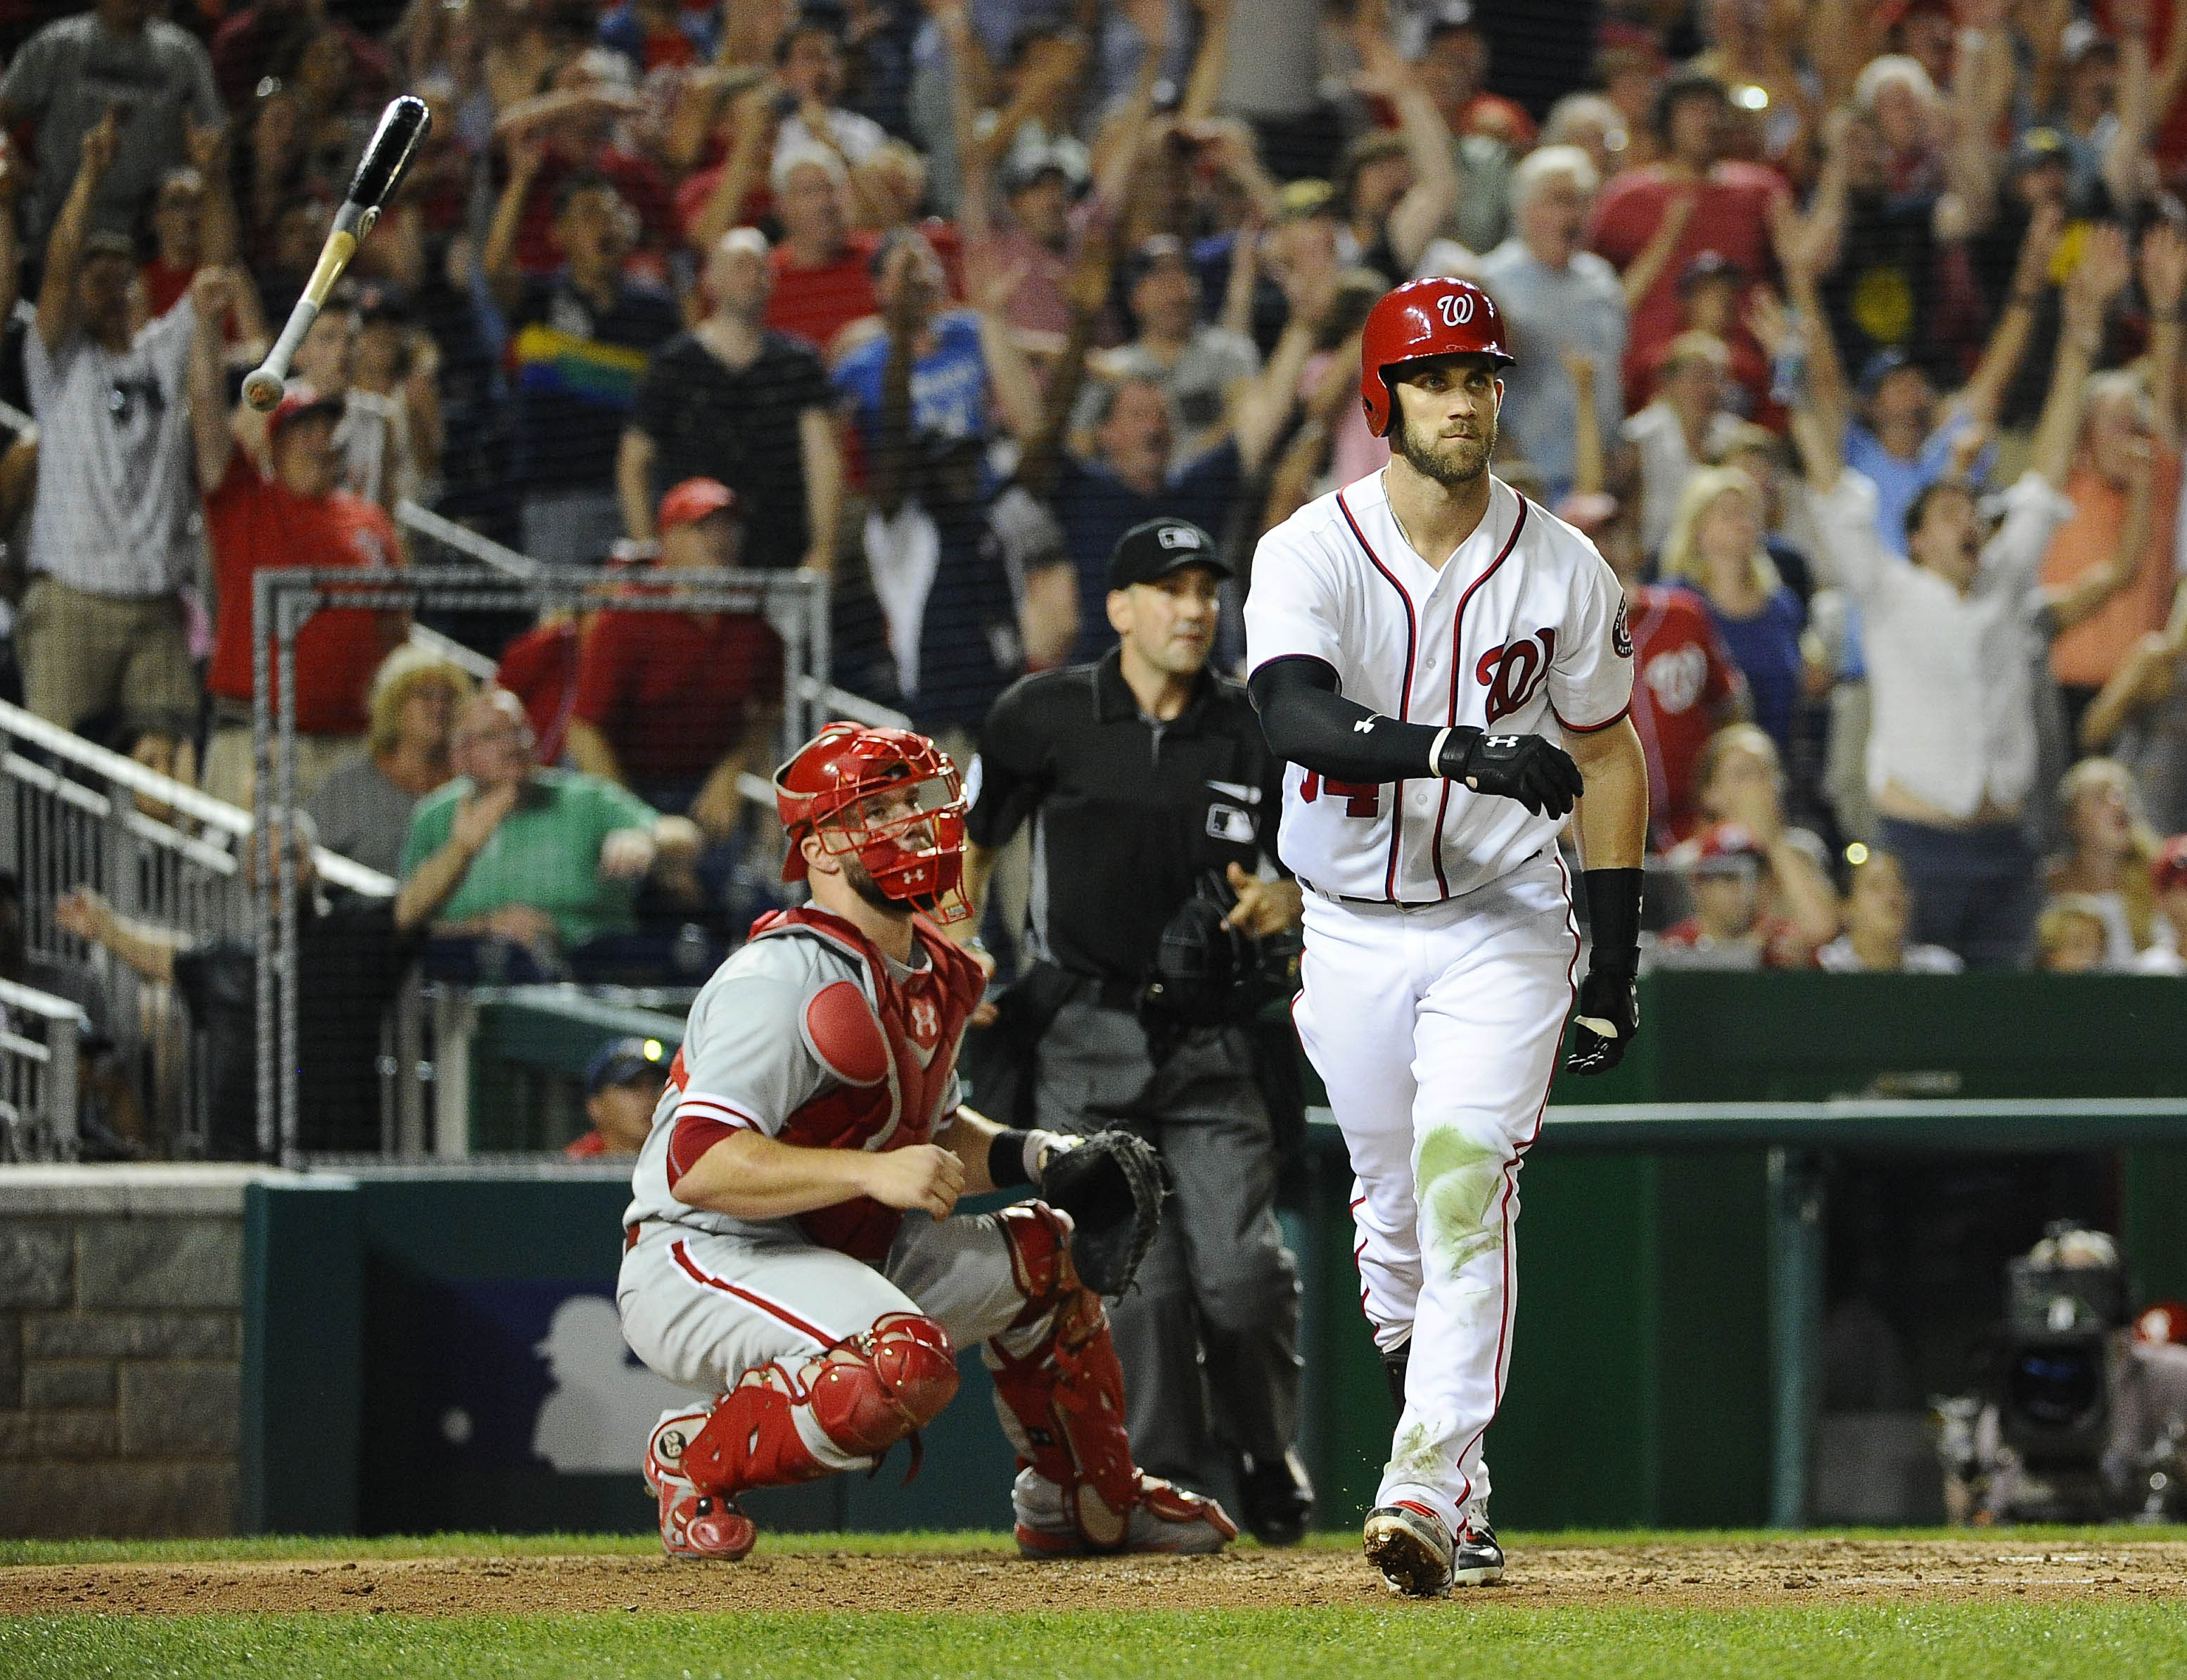 Bryce Harper hits 3 HRs in 3 ABs before grounding out – The Denver Post